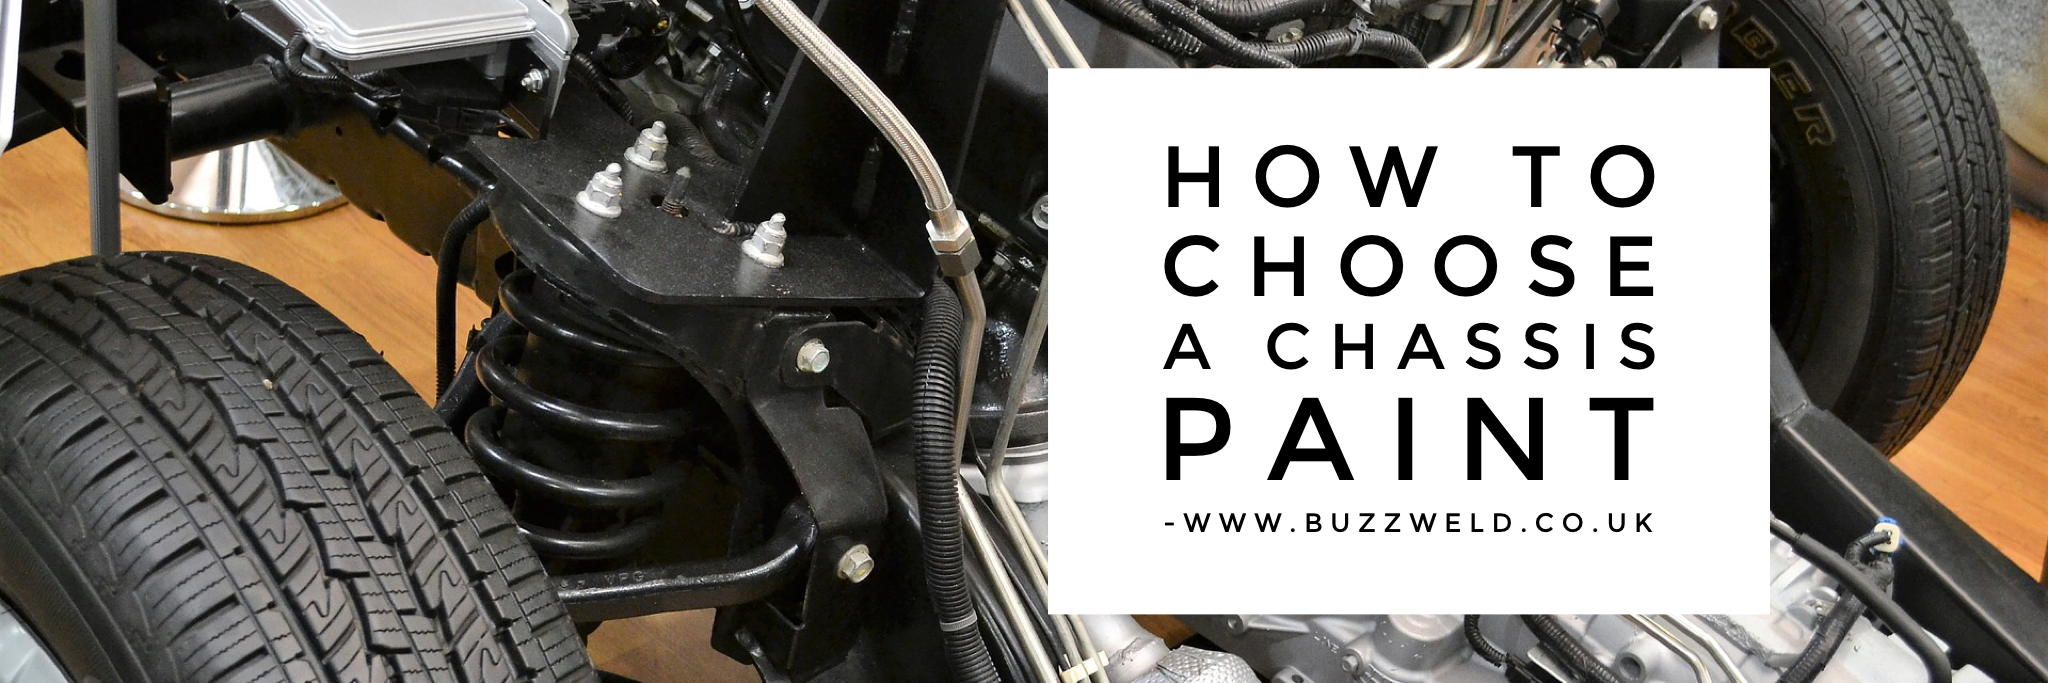 How To Choose A Chassis Paint